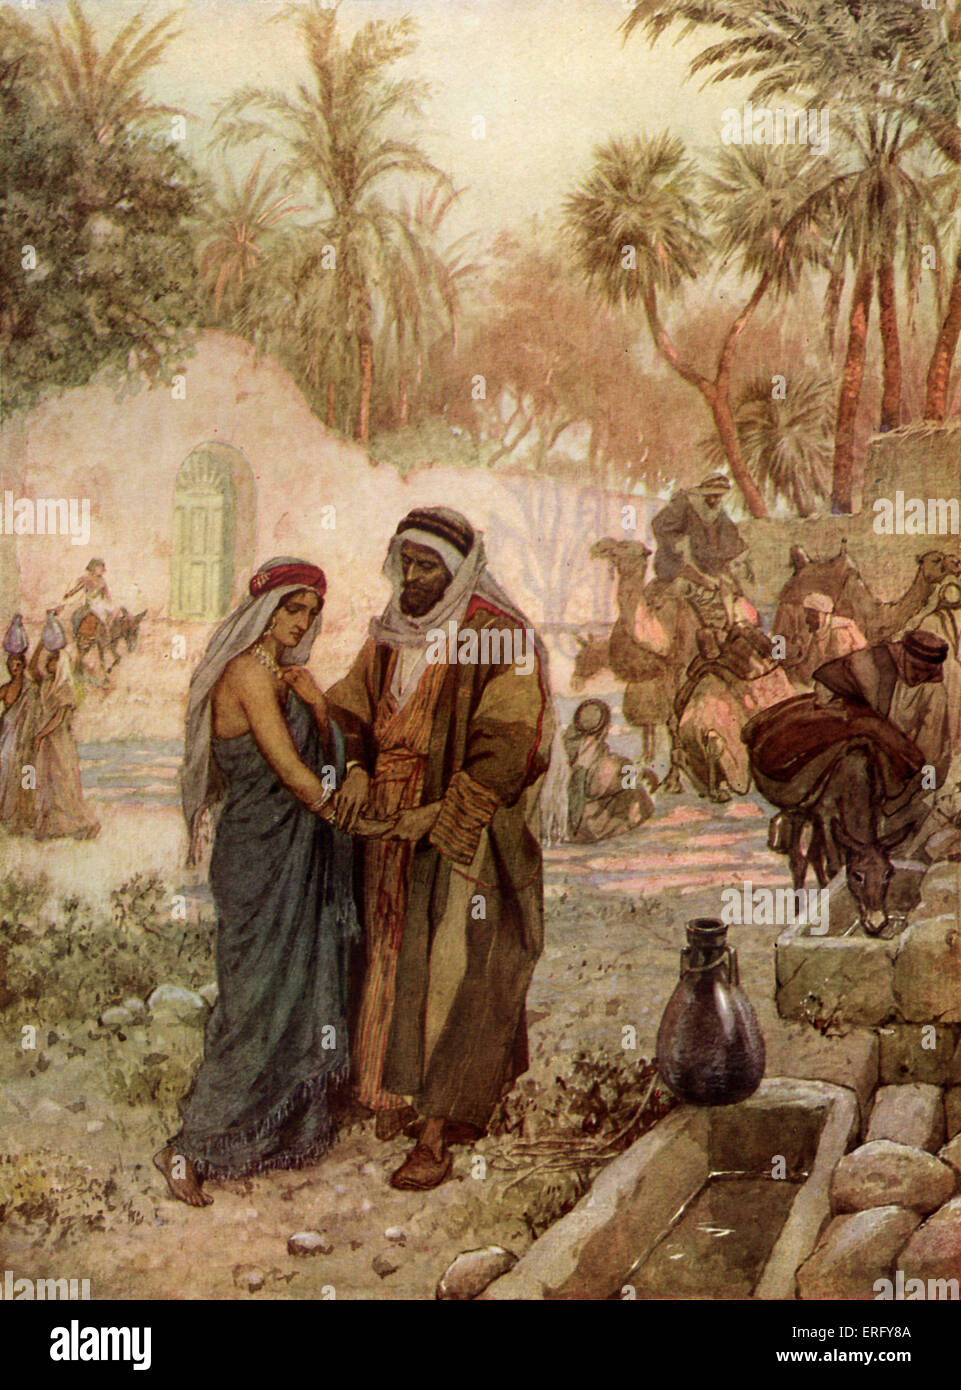 Eliezer and Rebekkah / Rebecca at the well. Genesis XXIV 17-20: When the camels had finished drinking, the man took out a gold Stock Photo